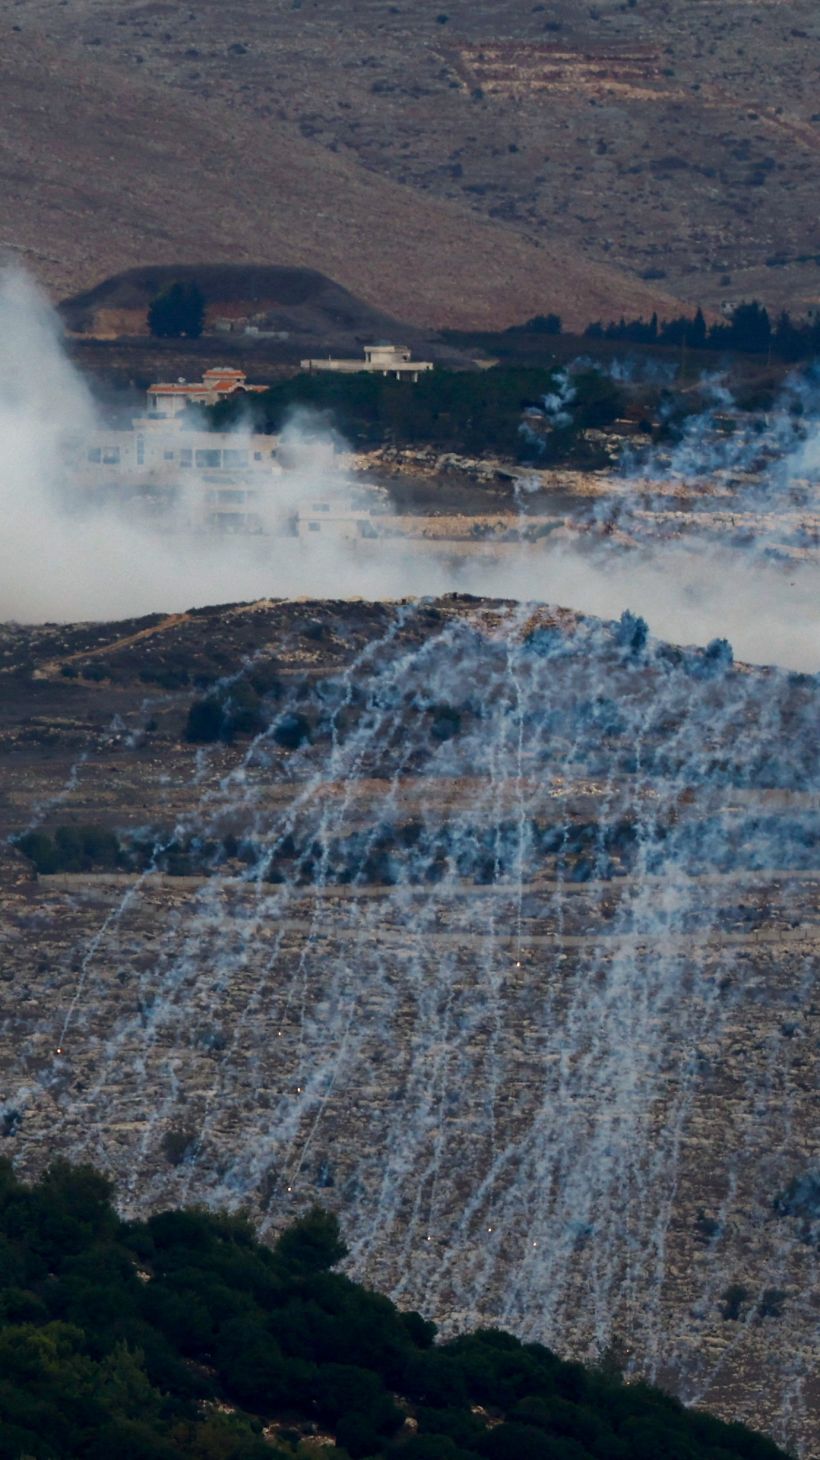 White phosphorus fired by Israeli army seen in the border area